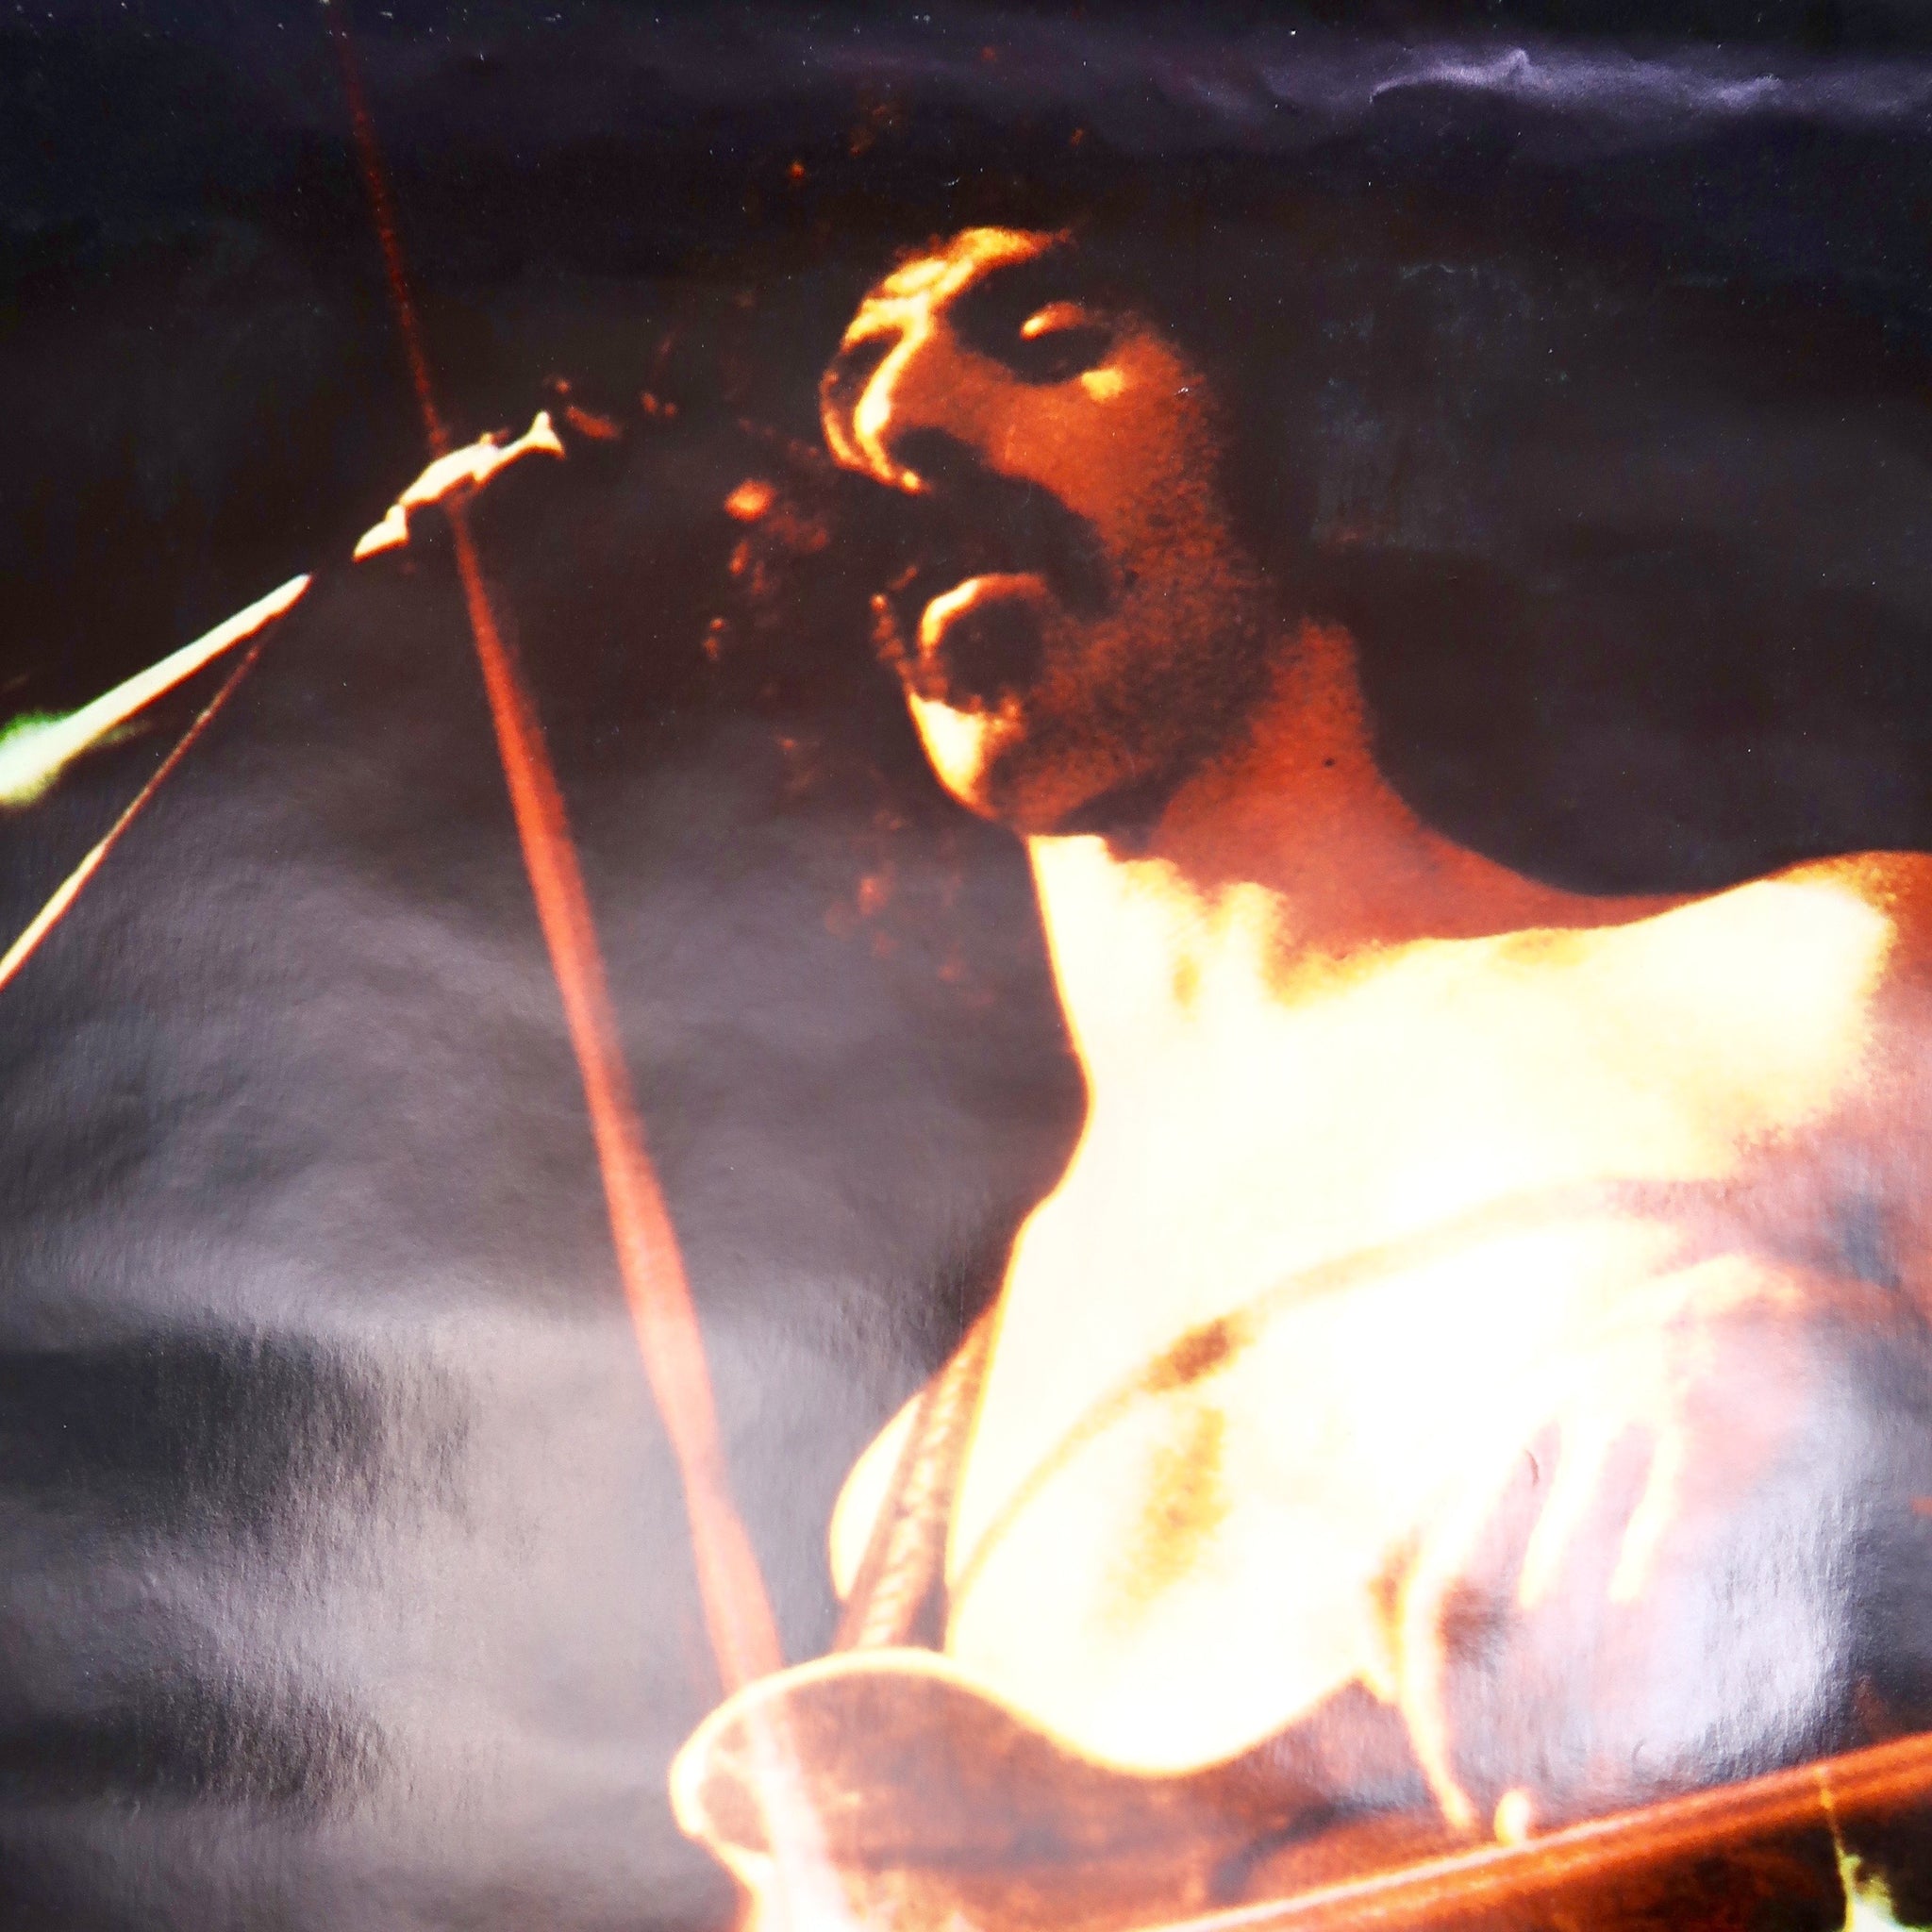 Original 1970's poster of Frank Zappa, by Big O Posters.